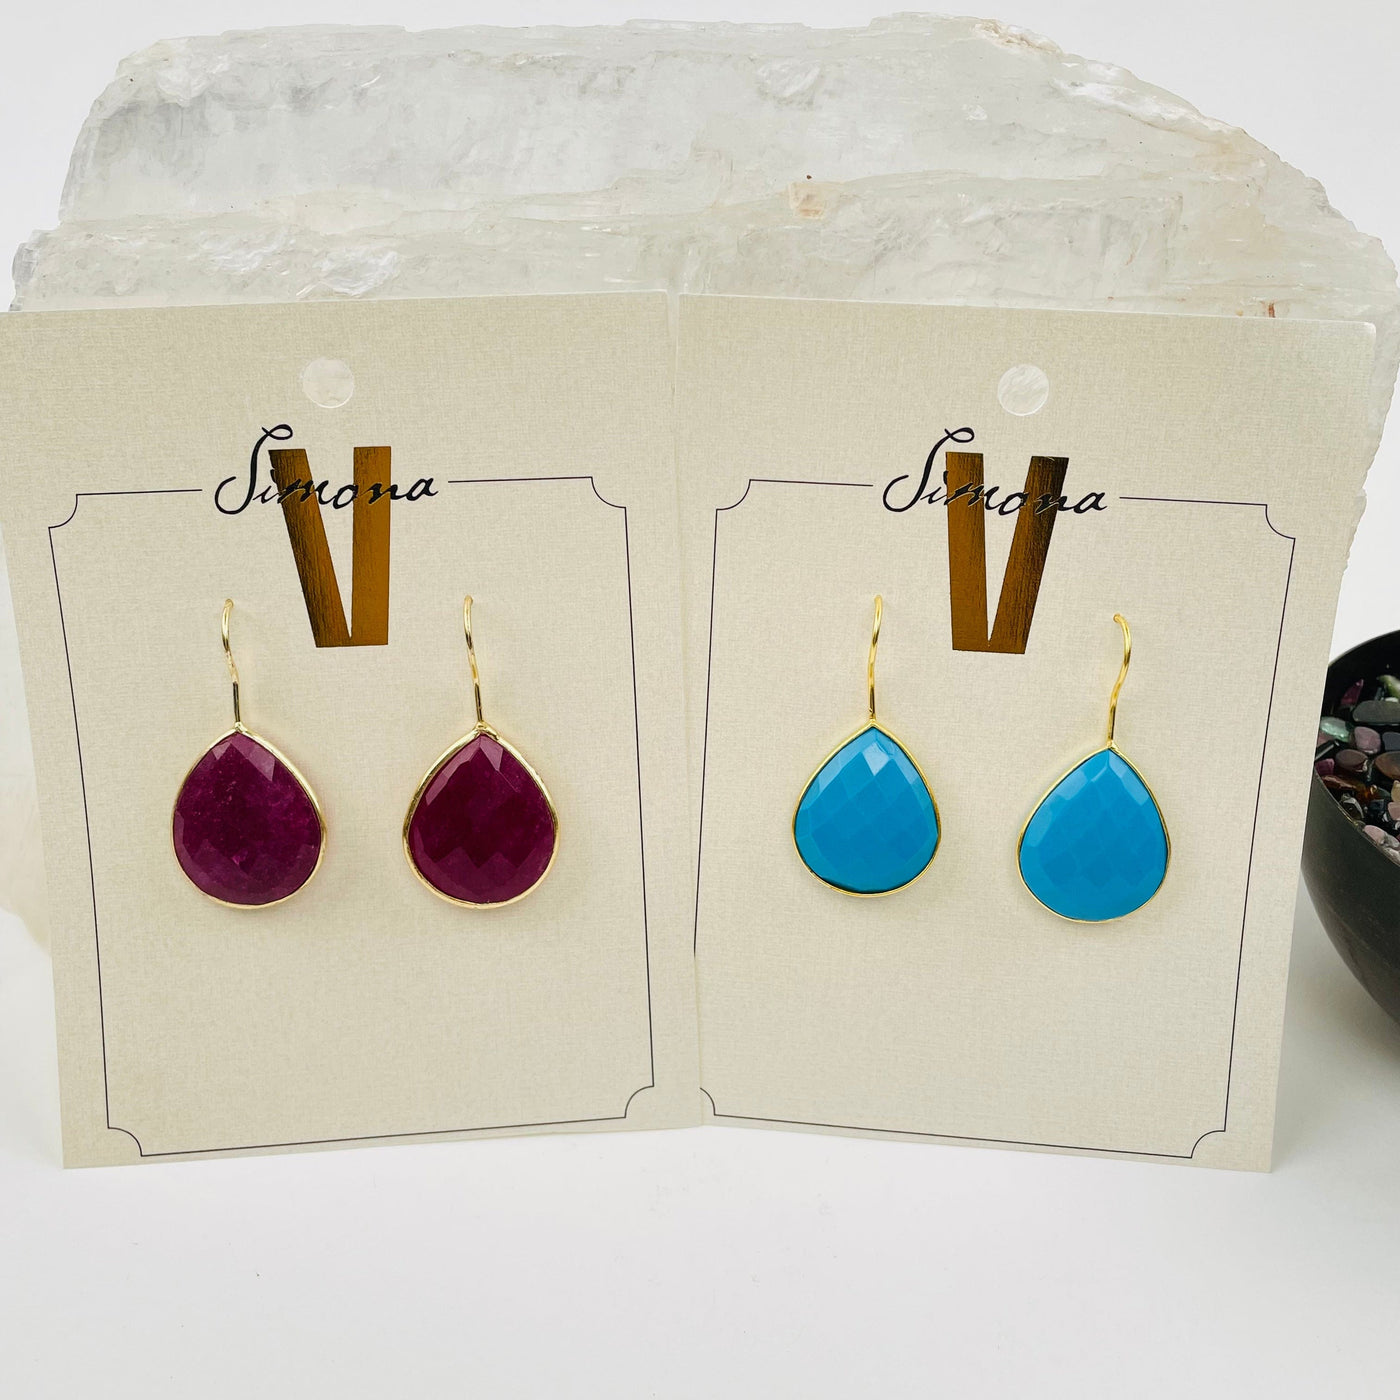 tear drop style earrings displayed to show the differences in the gemstone types 